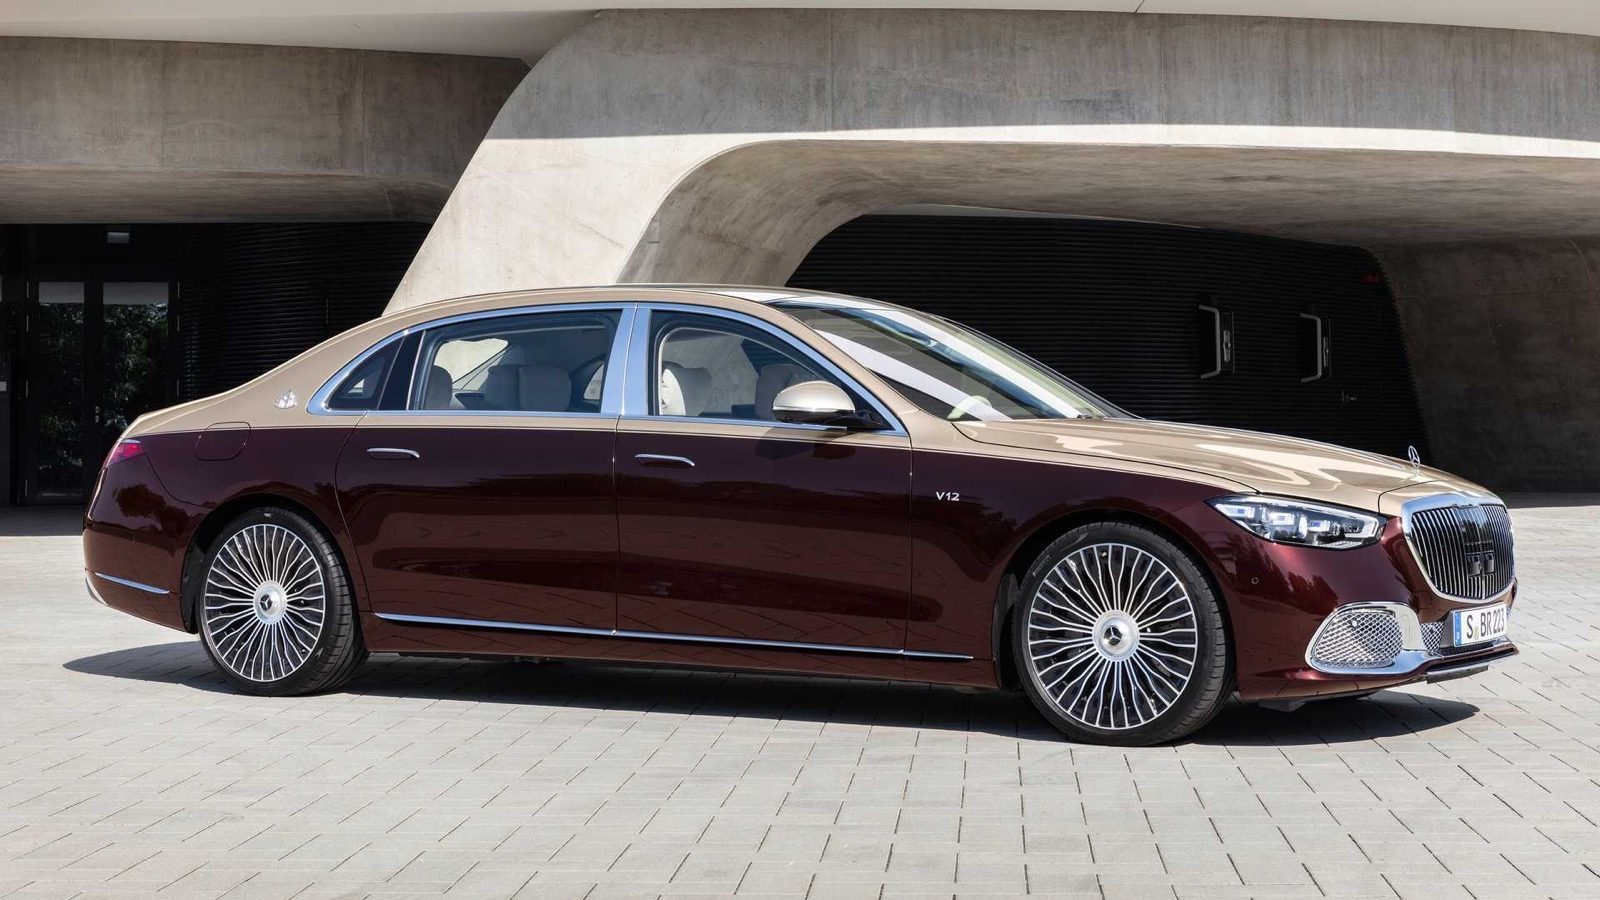 Mercedes-Maybach S680